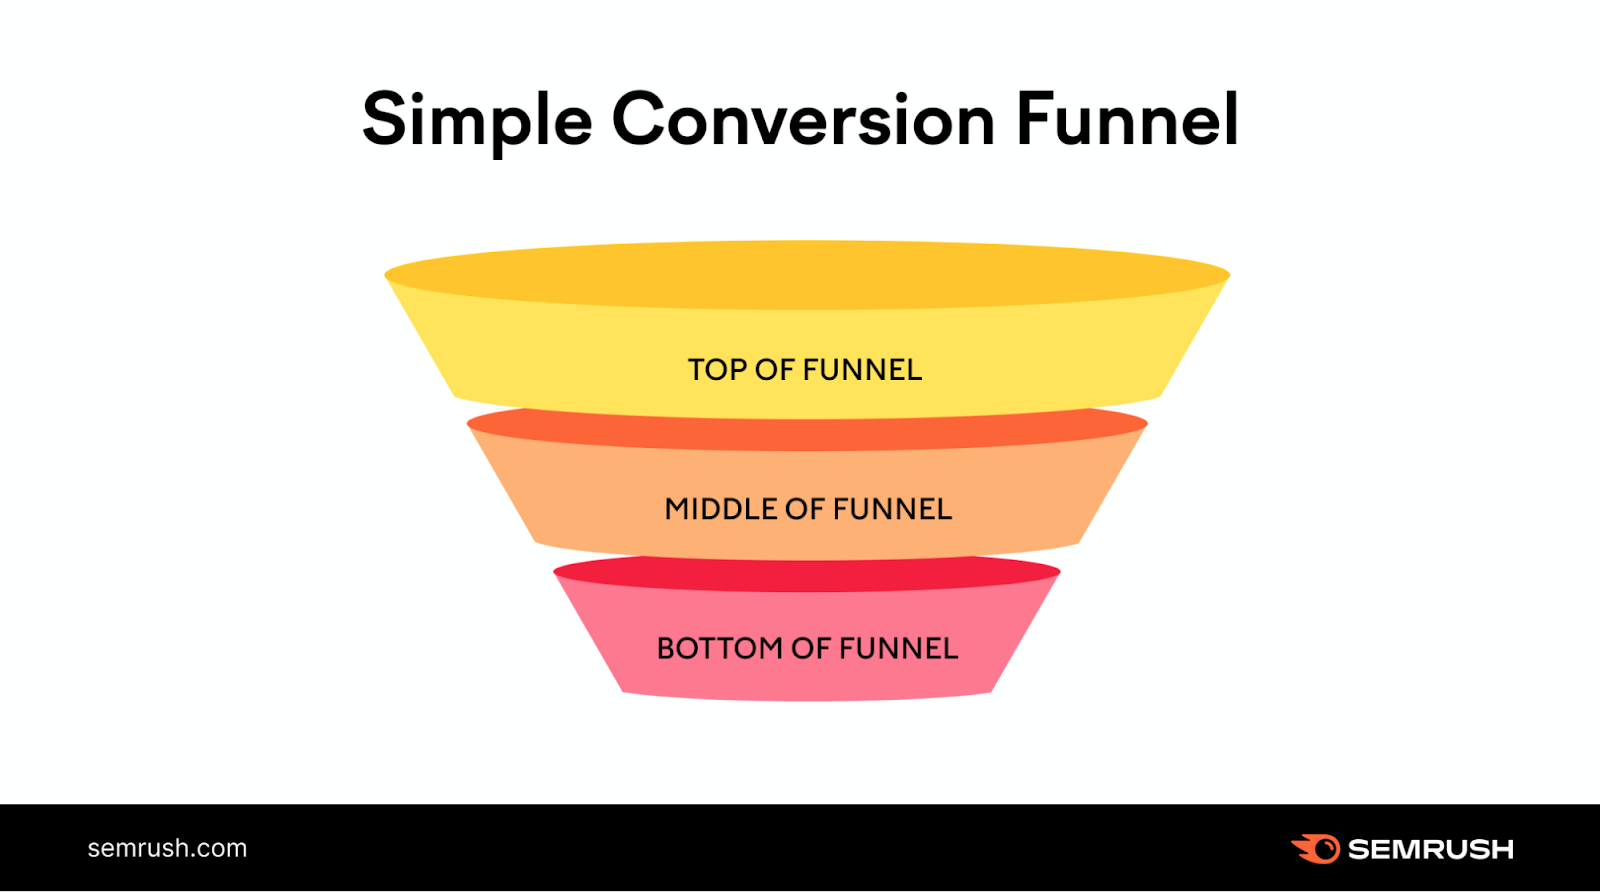 A visual of a simple conversion funnel